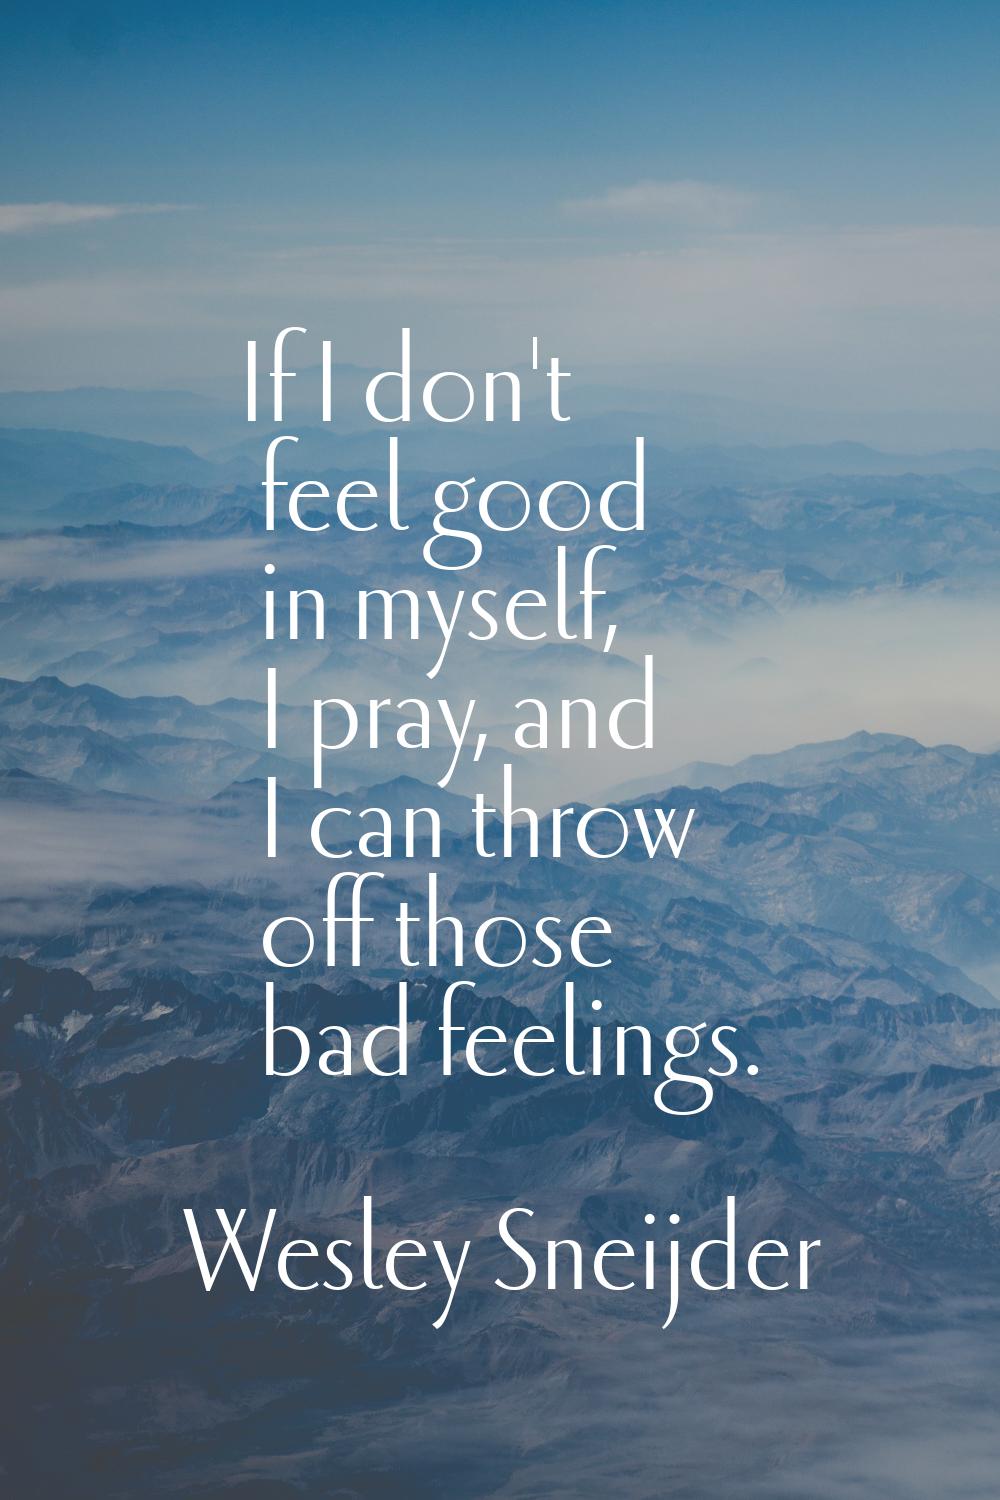 If I don't feel good in myself, I pray, and I can throw off those bad feelings.